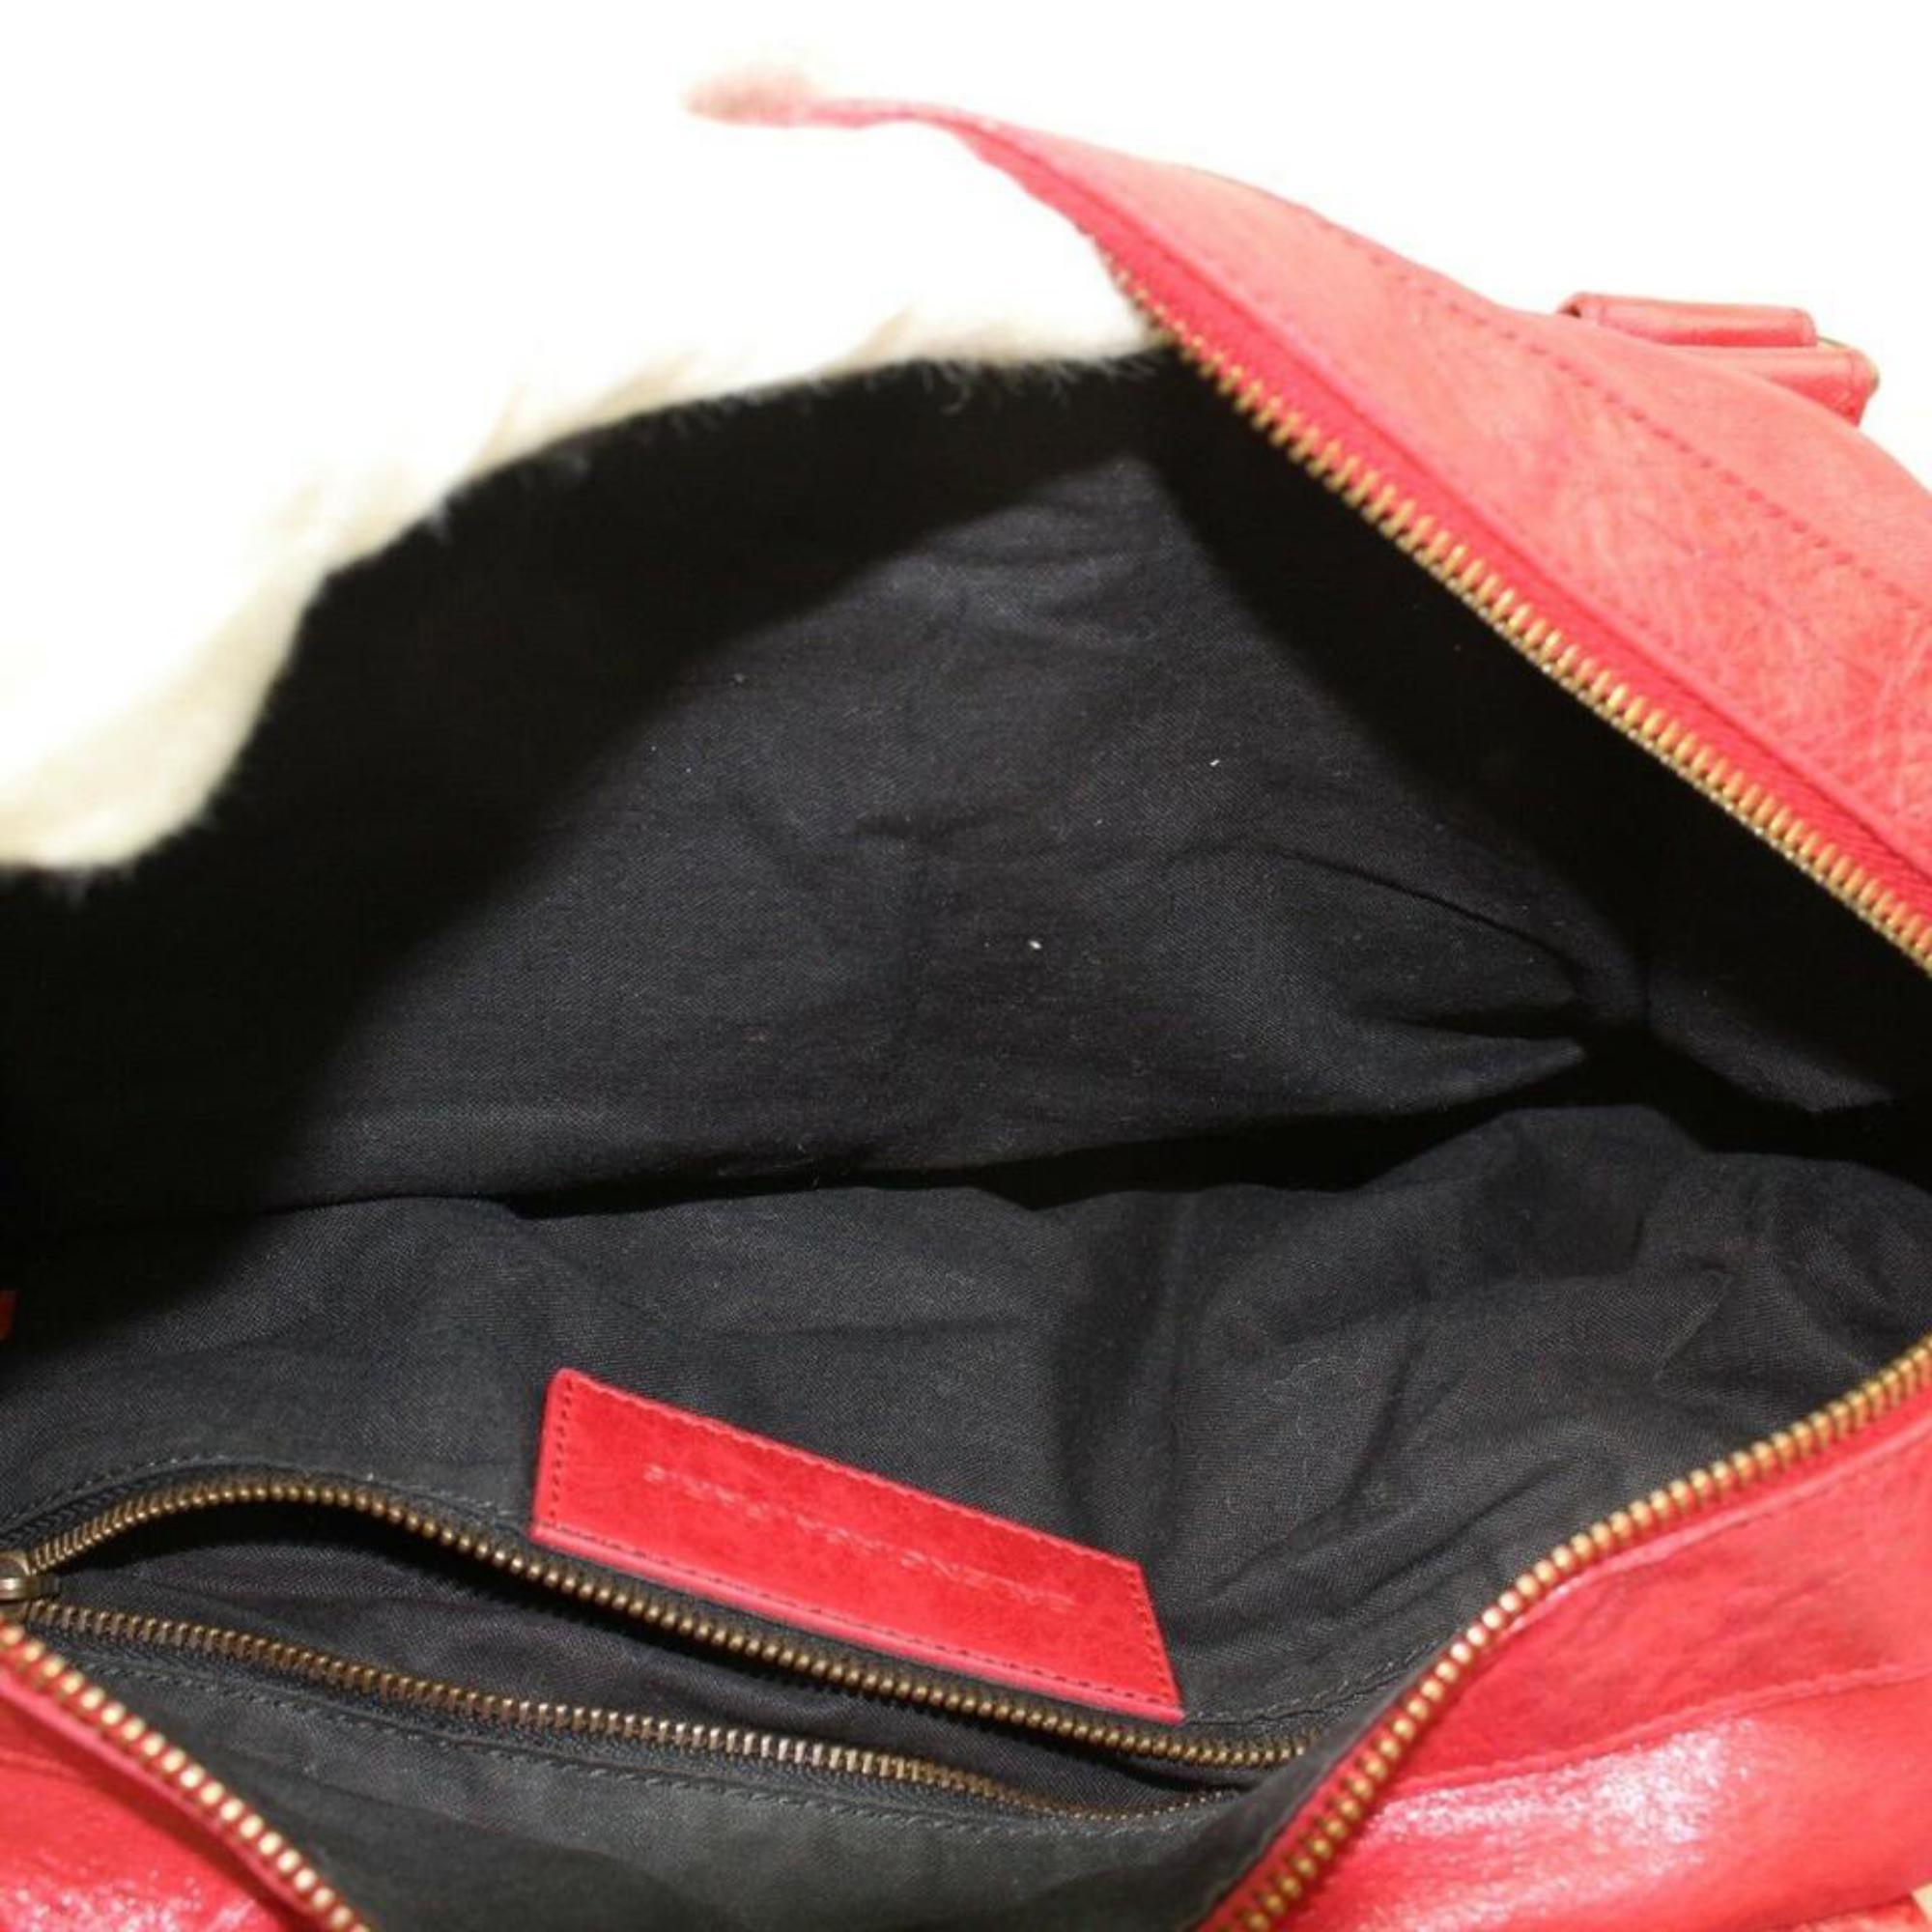 Balenciaga Twiggy 2way 870065 Red Leather Shoulder Bag In Good Condition For Sale In Forest Hills, NY